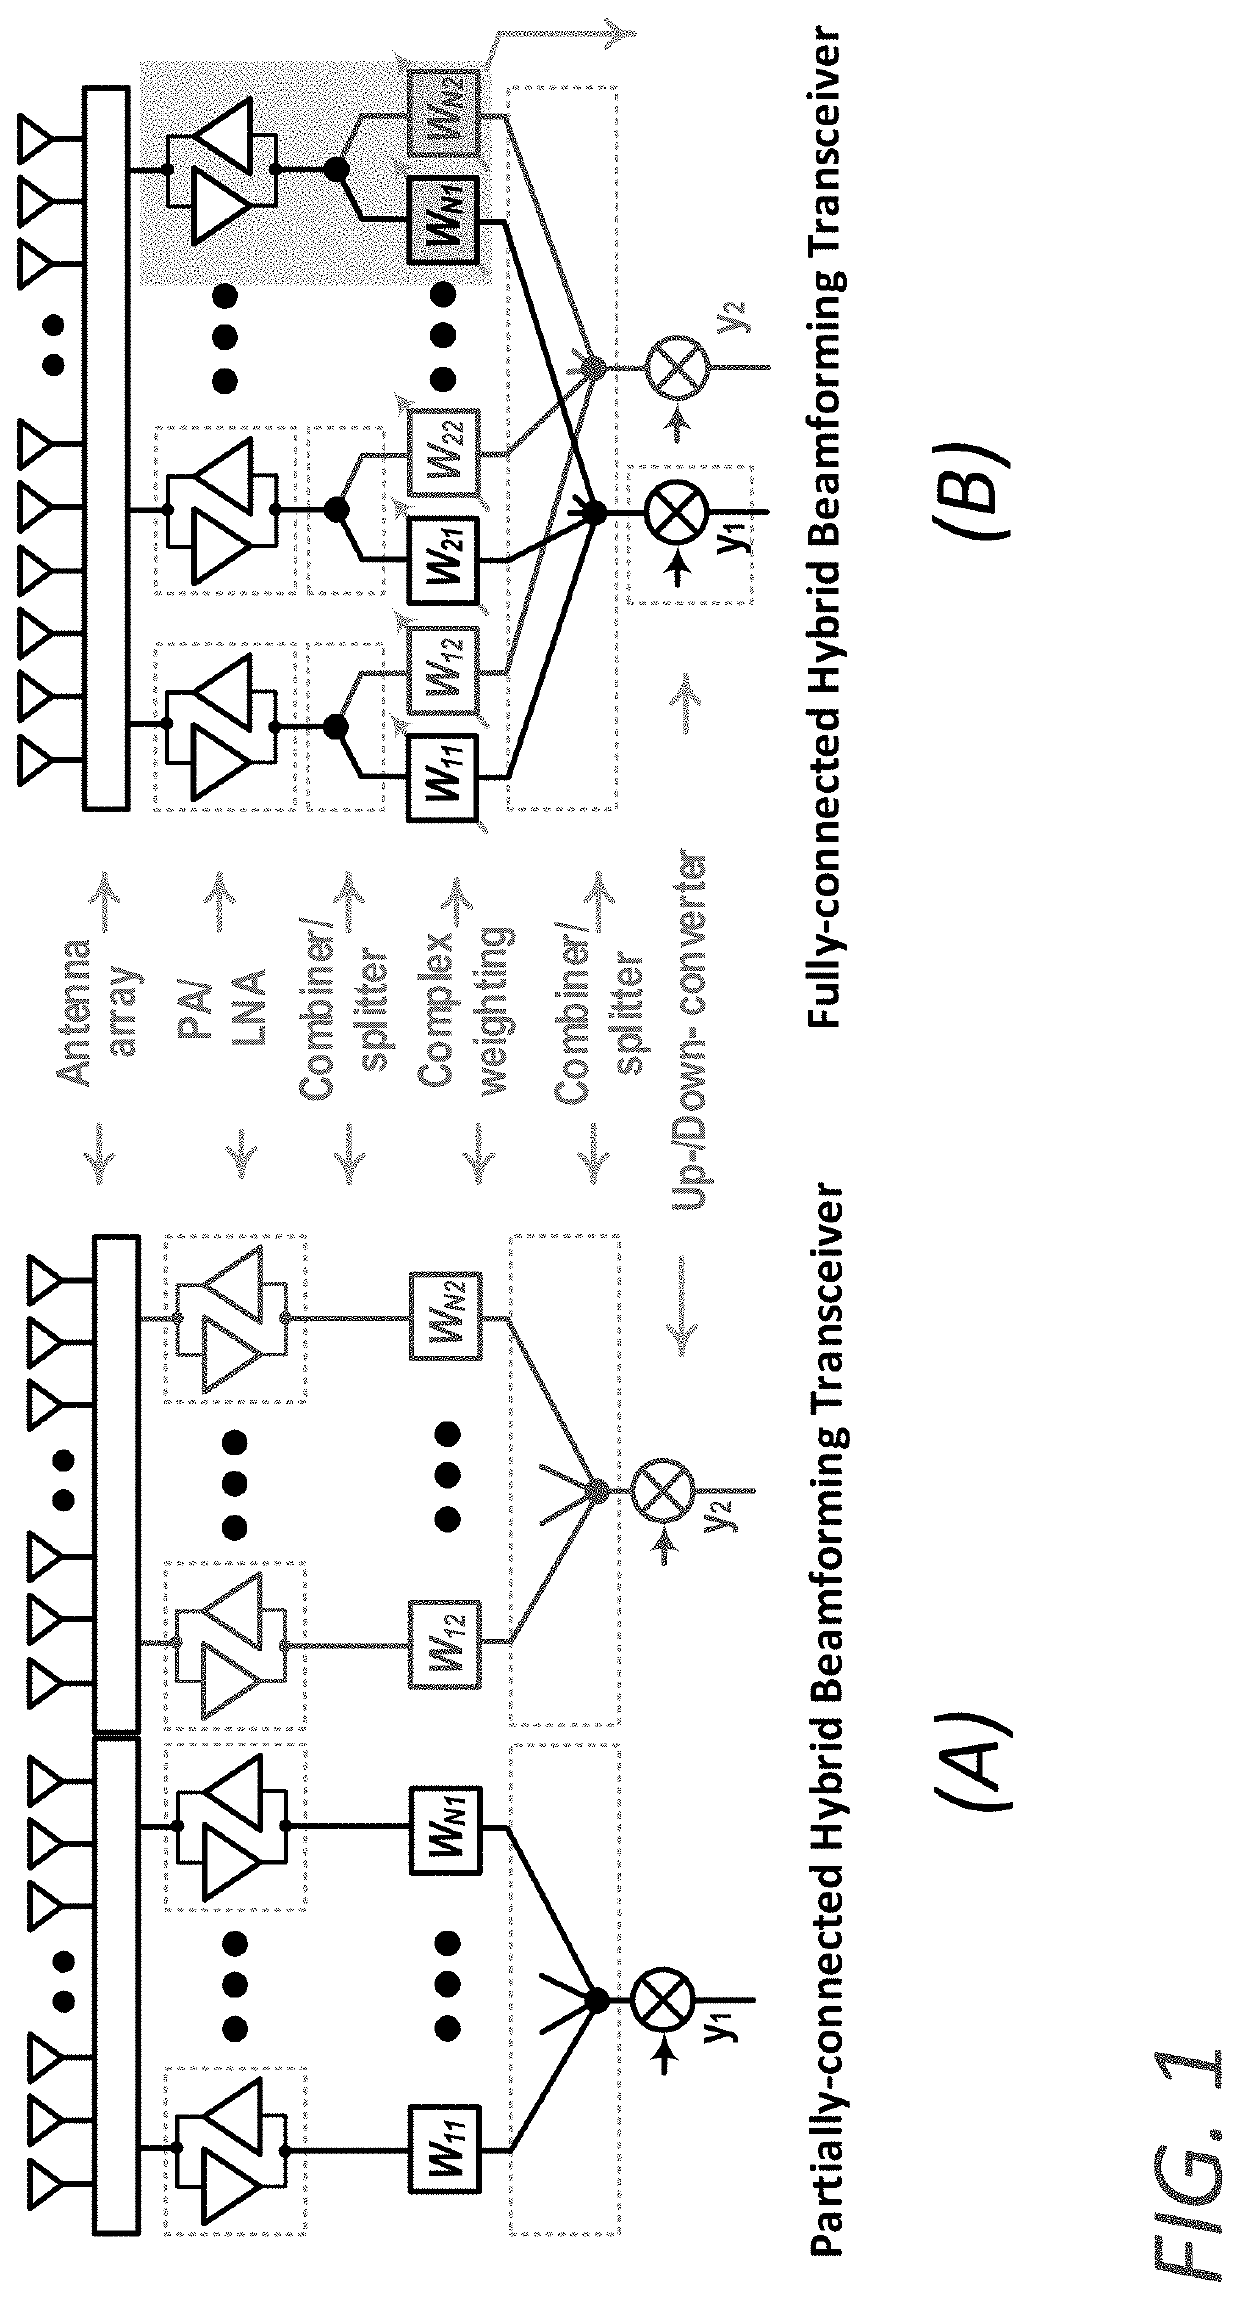 Reconfigurable, bi-directional, multi-band front end for a hybrid beamforming transceiver